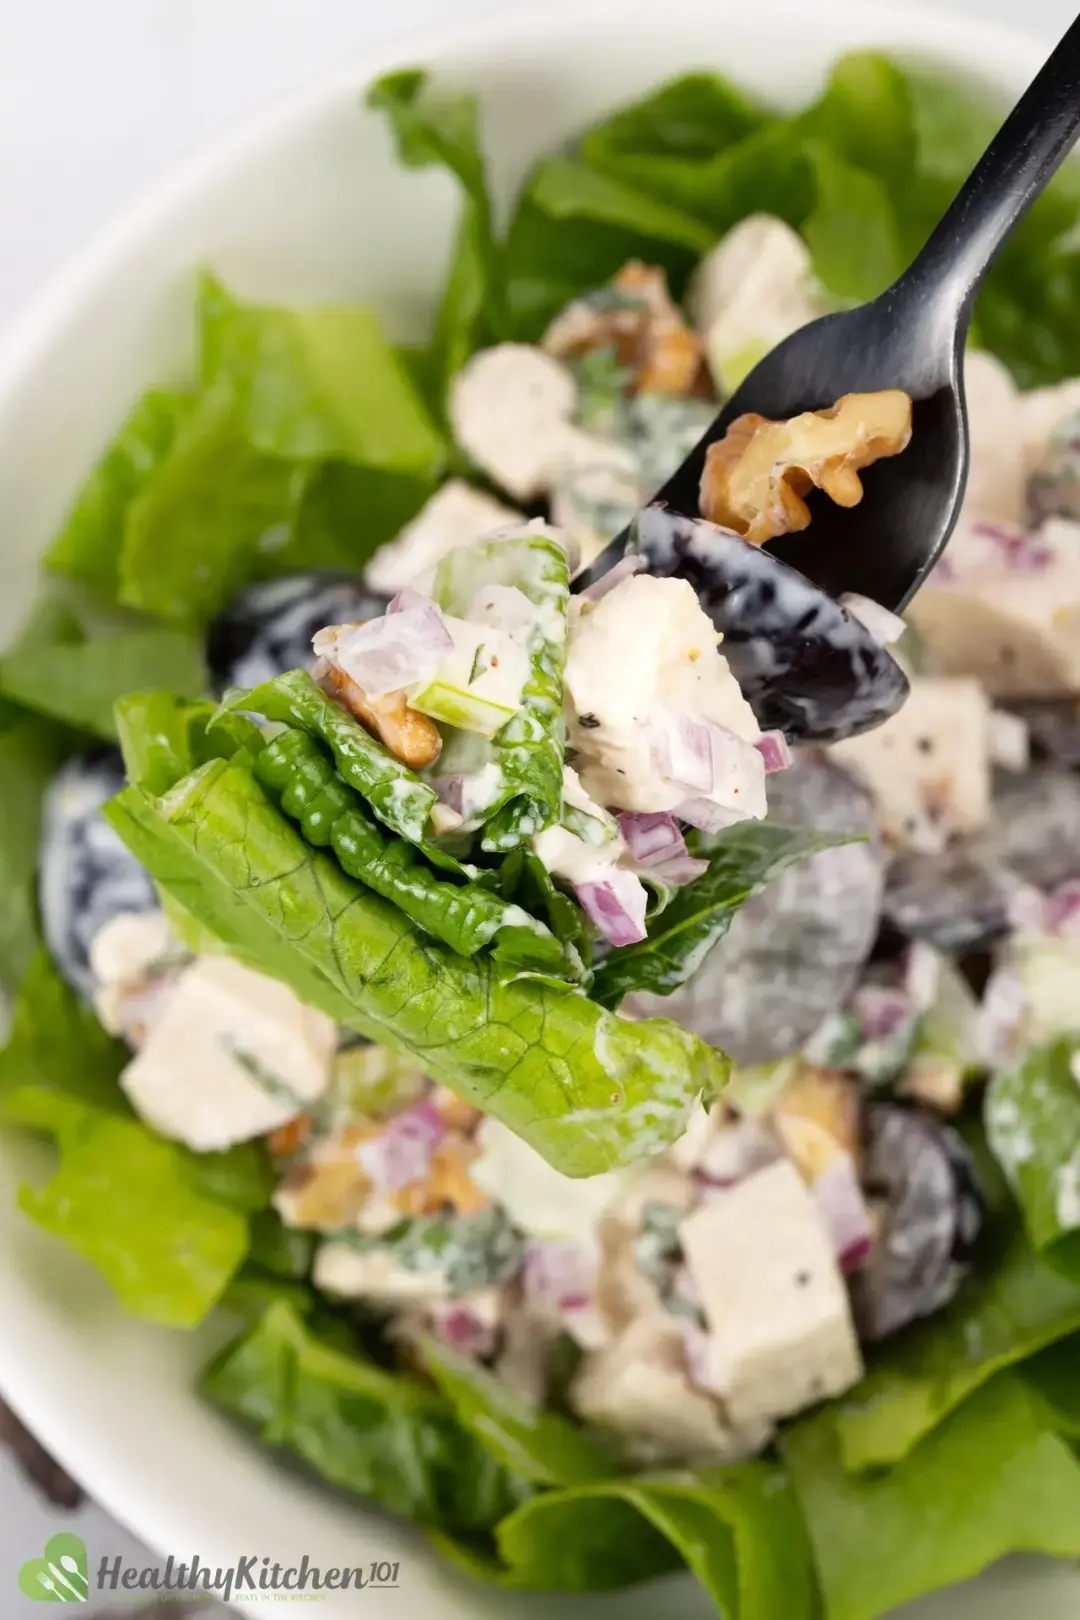 A fork holding lettuce, halved grapes, walnuts, and fruits covered in white dressing hovering over a salad bowl